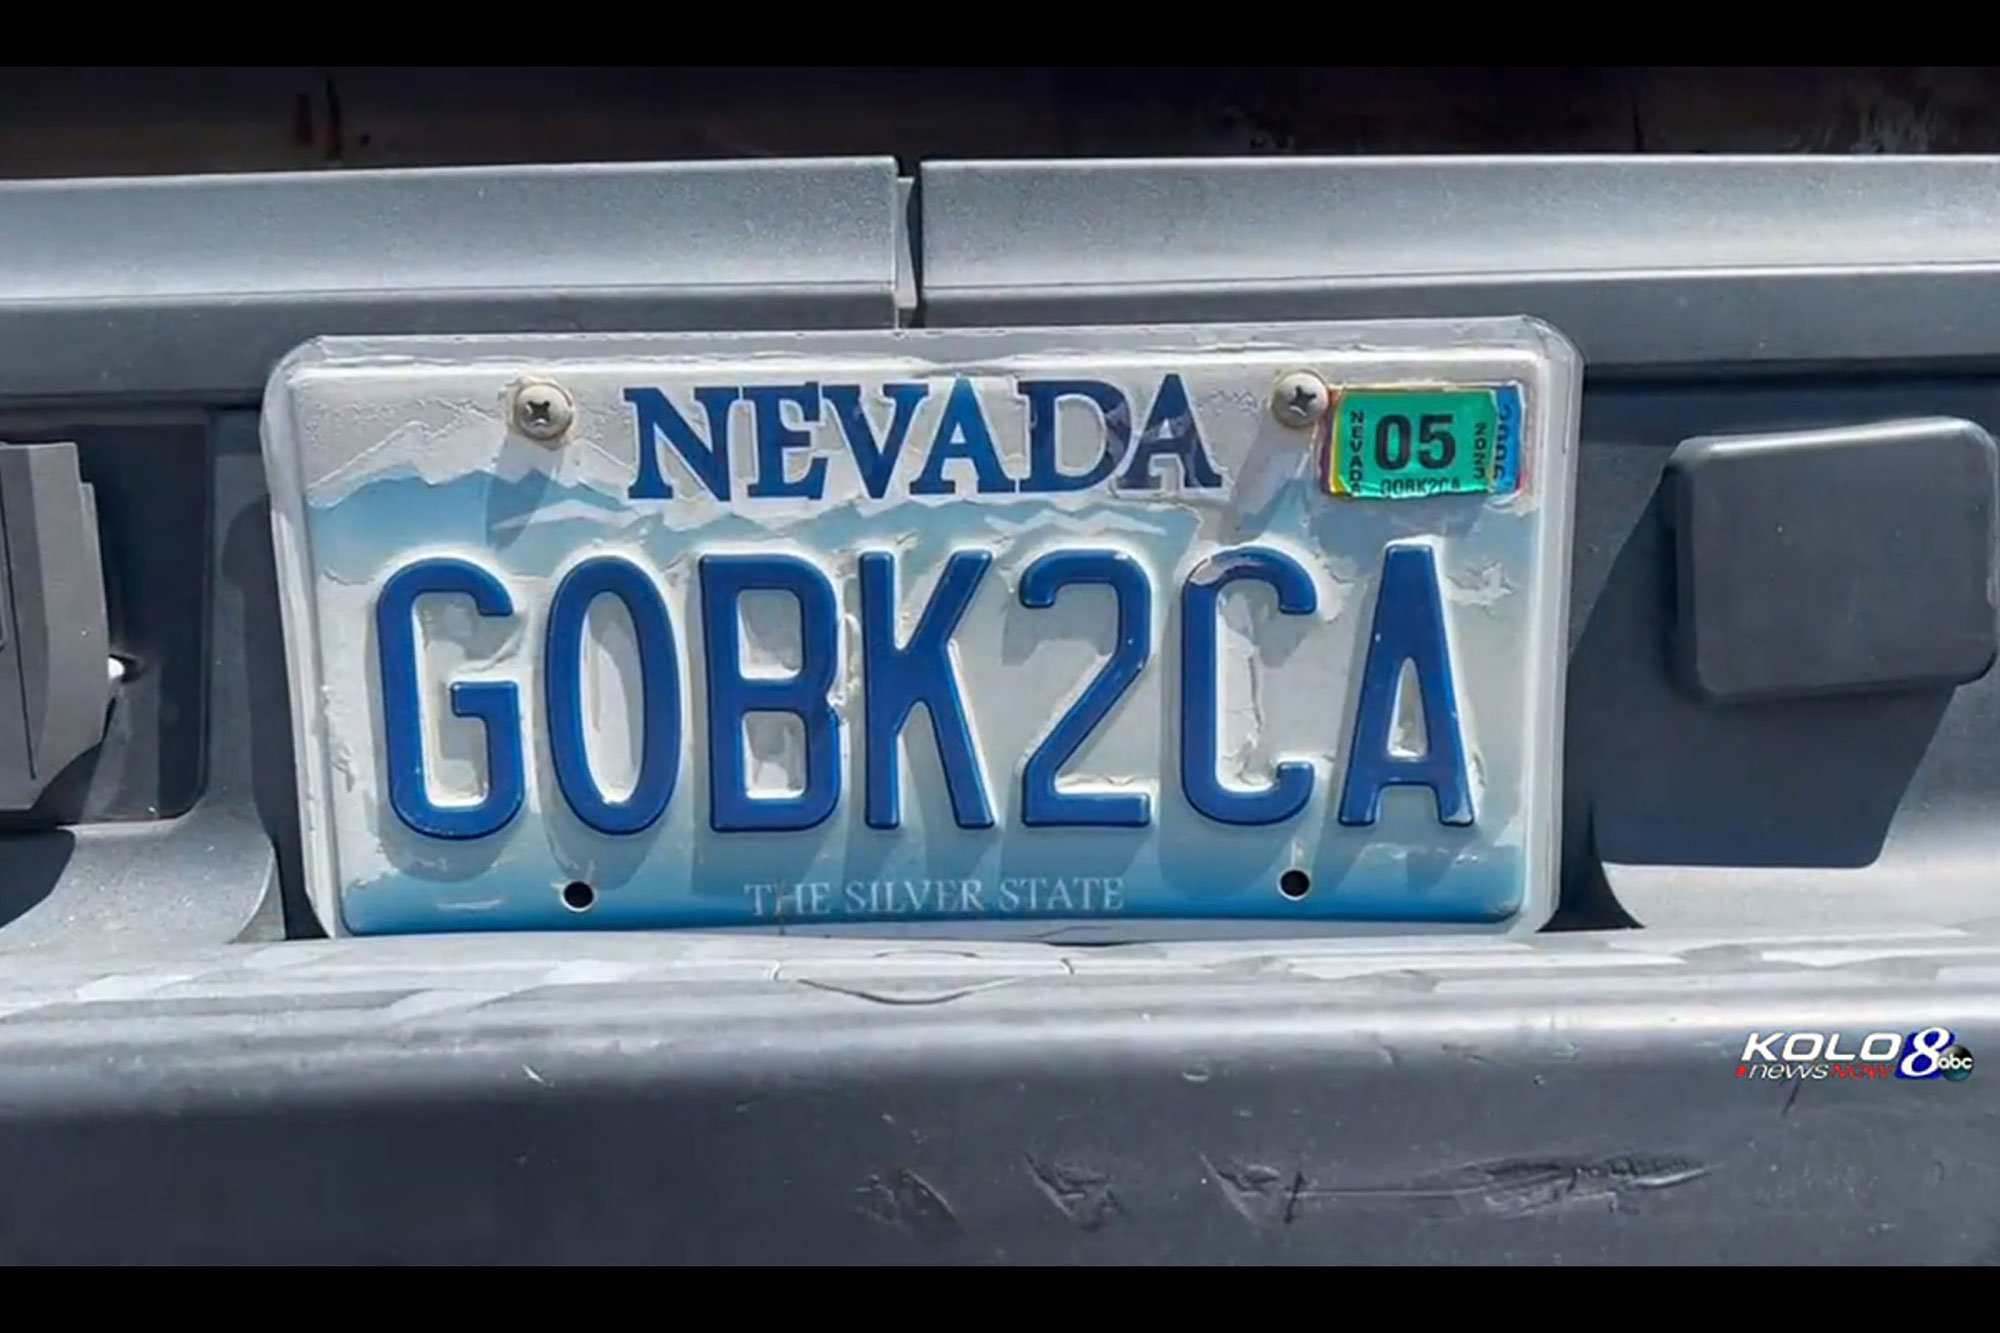 Nevada license plate with shortened message to ‘Go back to California